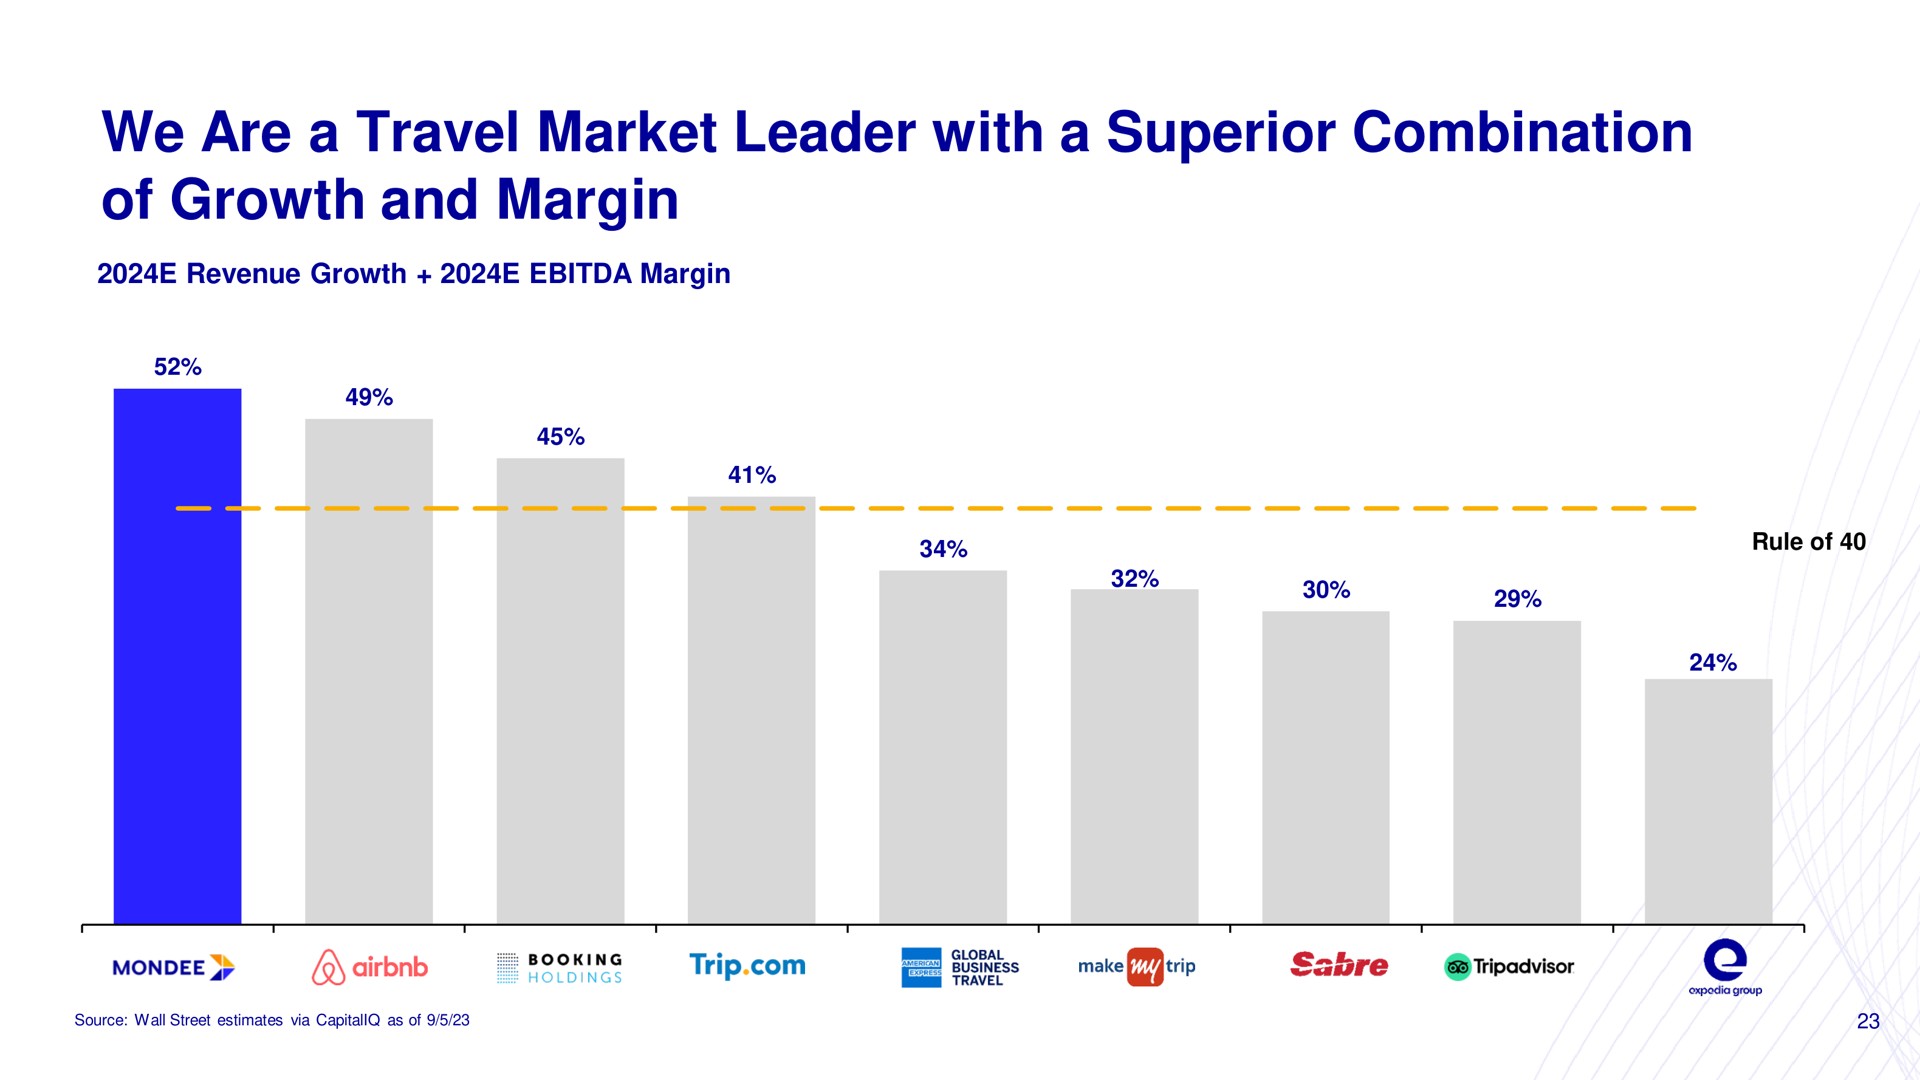 we are a travel market leader with a superior combination of growth and margin | Mondee